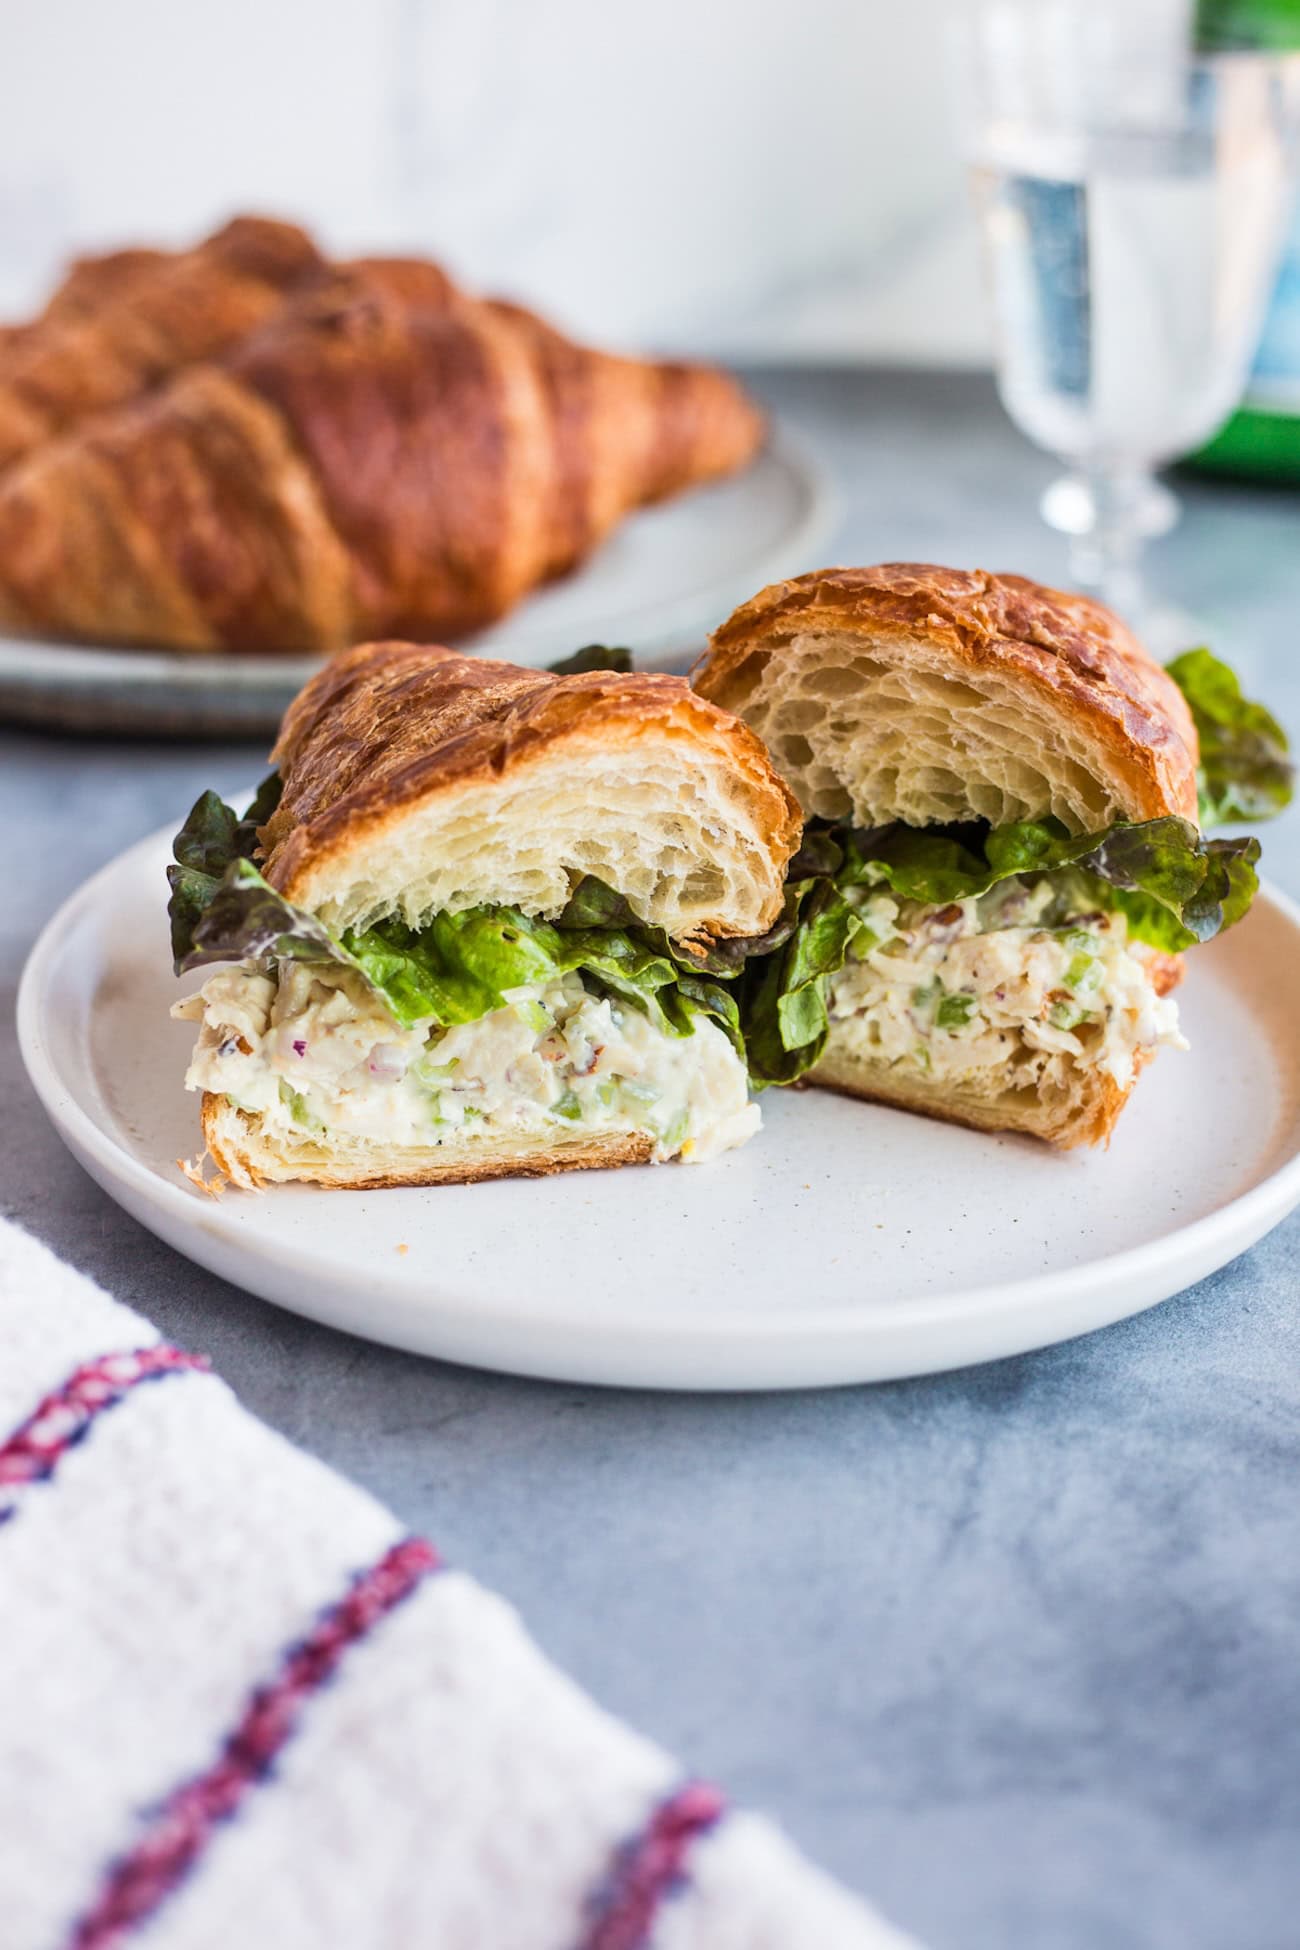 A croissant sandwich topped with chicken salad and lettuce